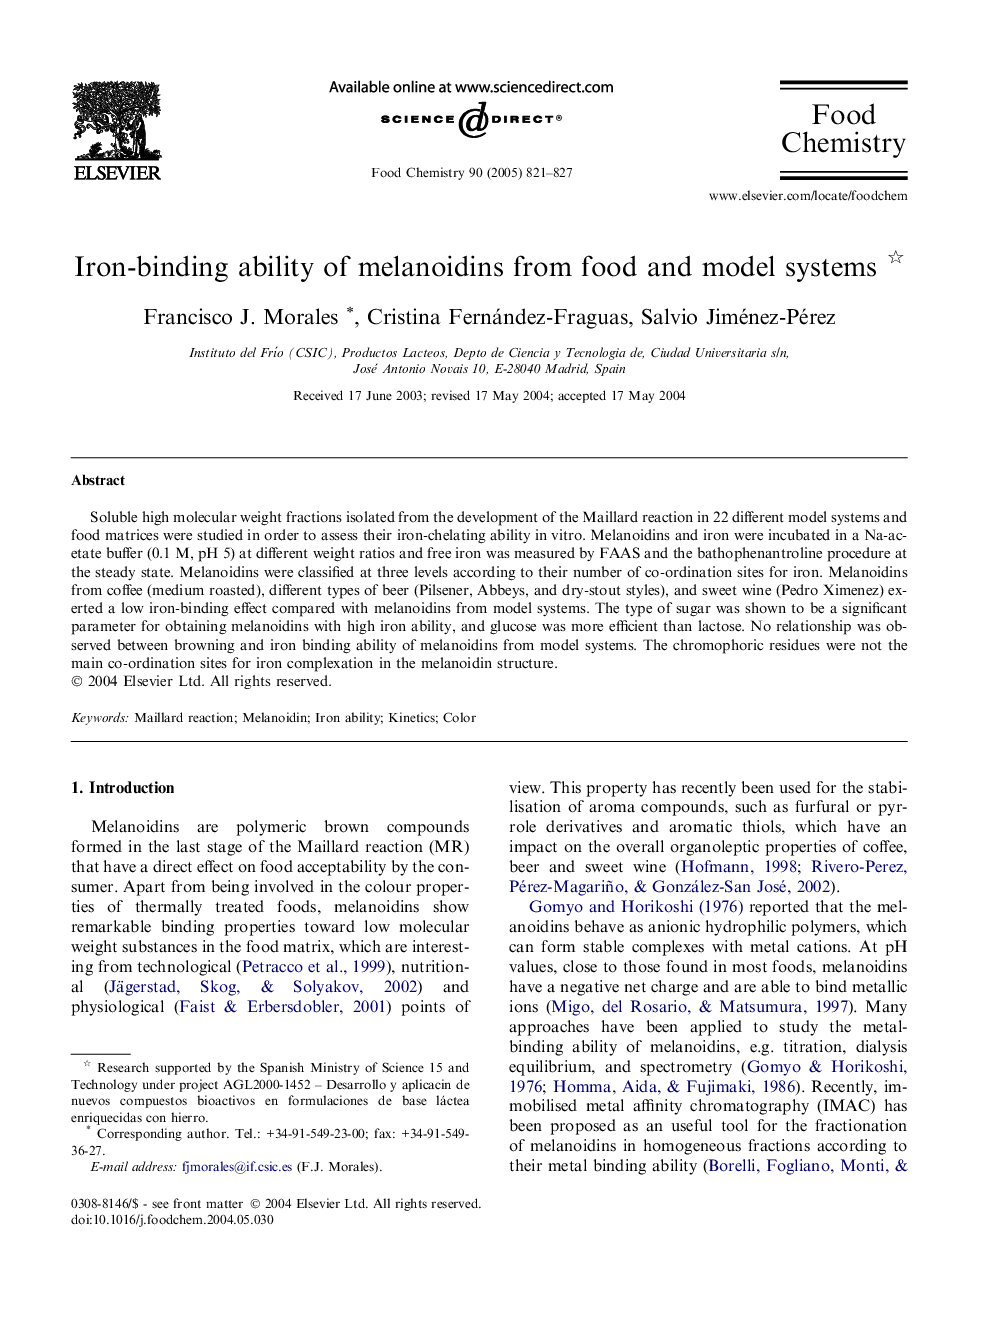 Iron-binding ability of melanoidins from food and model systems